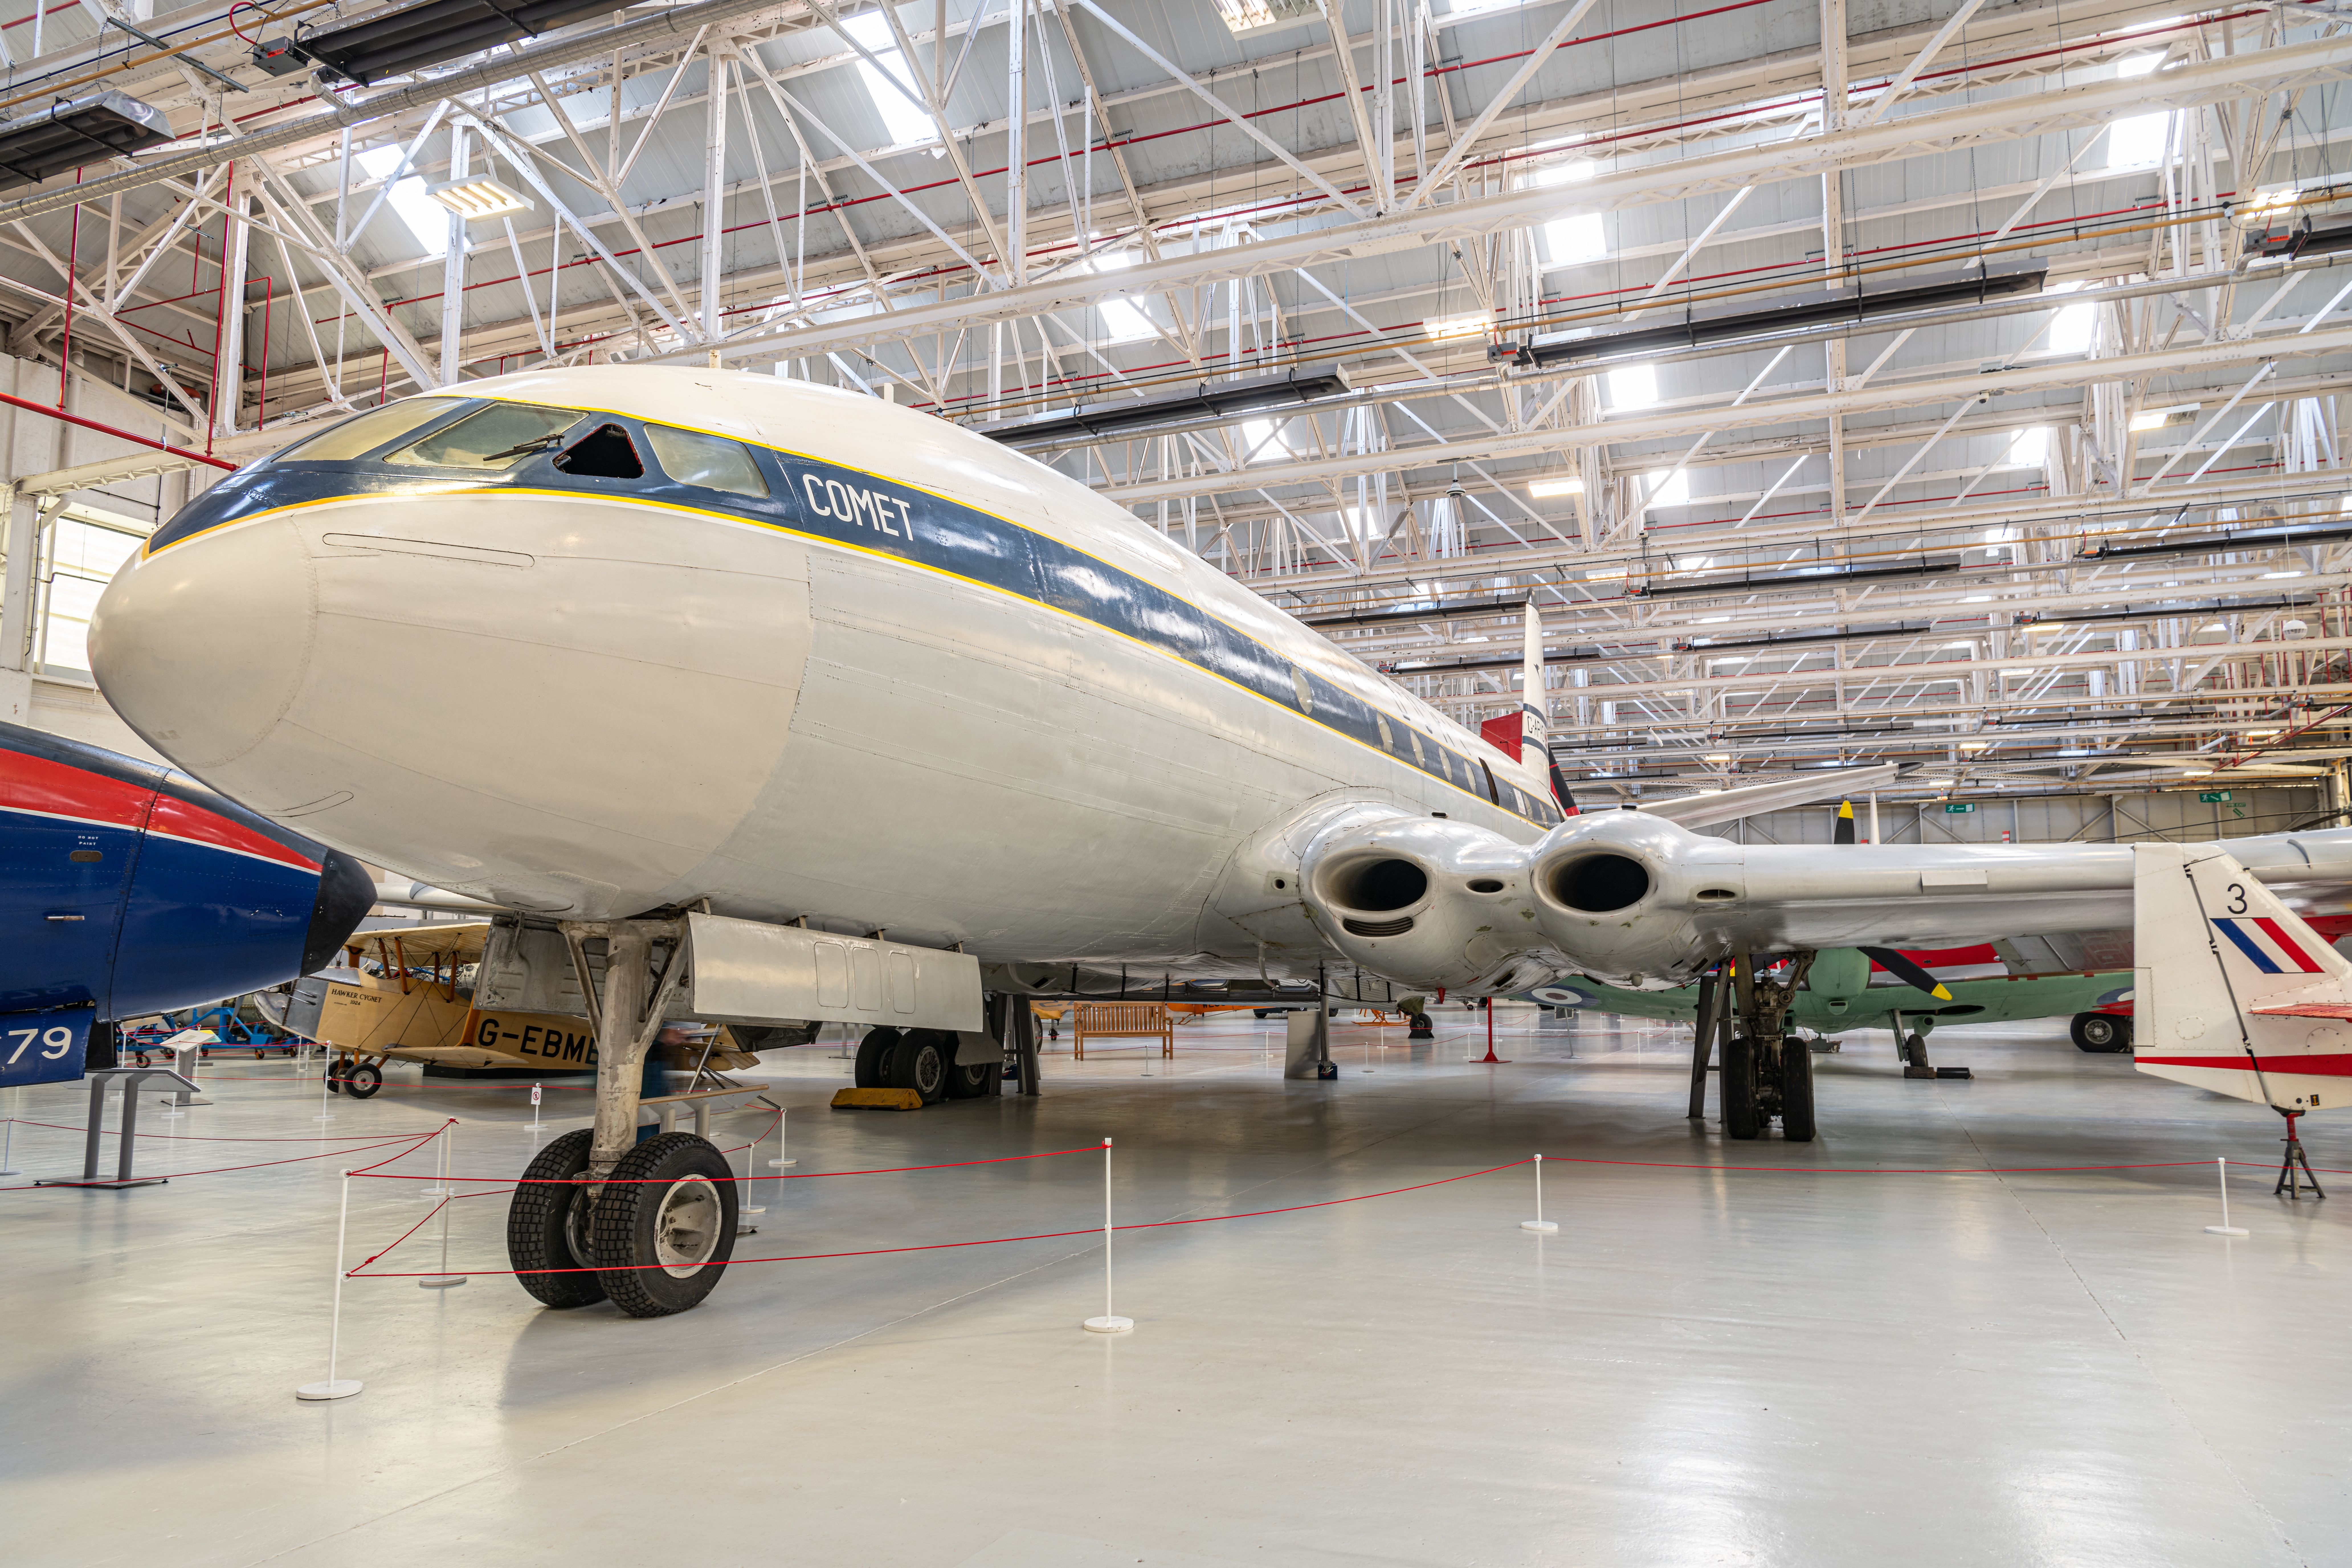 A DeHavilland Comet Airliner on display at the RAF Museum.